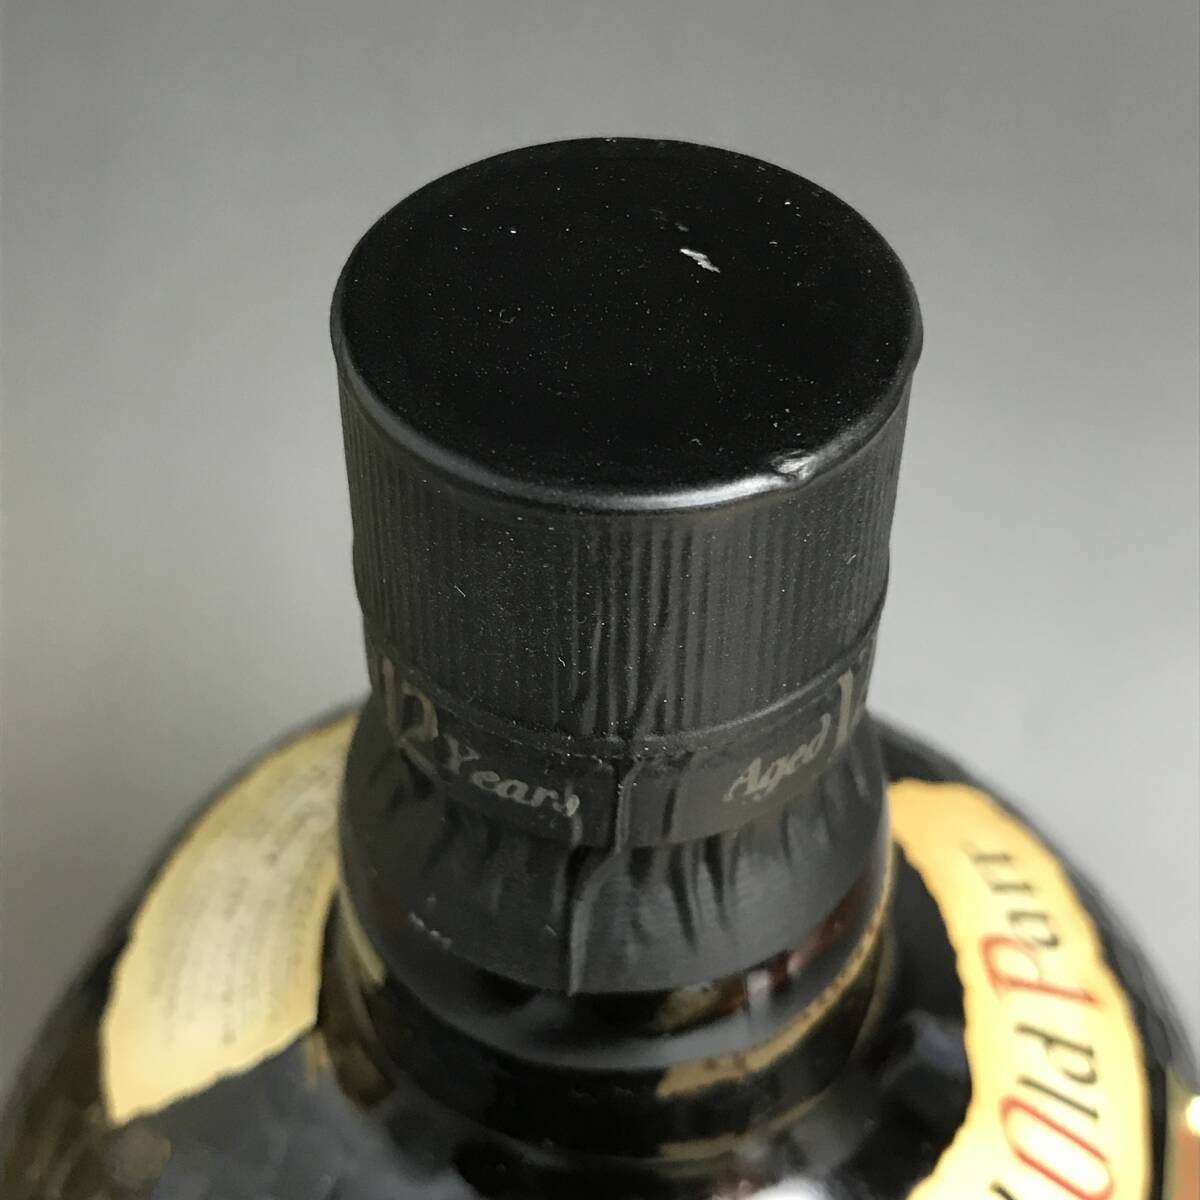 mt7/77 Grand Old Parr 12years old De Luxe Scotch Whisky KING SIZE 43度 1000ml【オールドパー 12年 デラックス キングサイズ】■の画像8